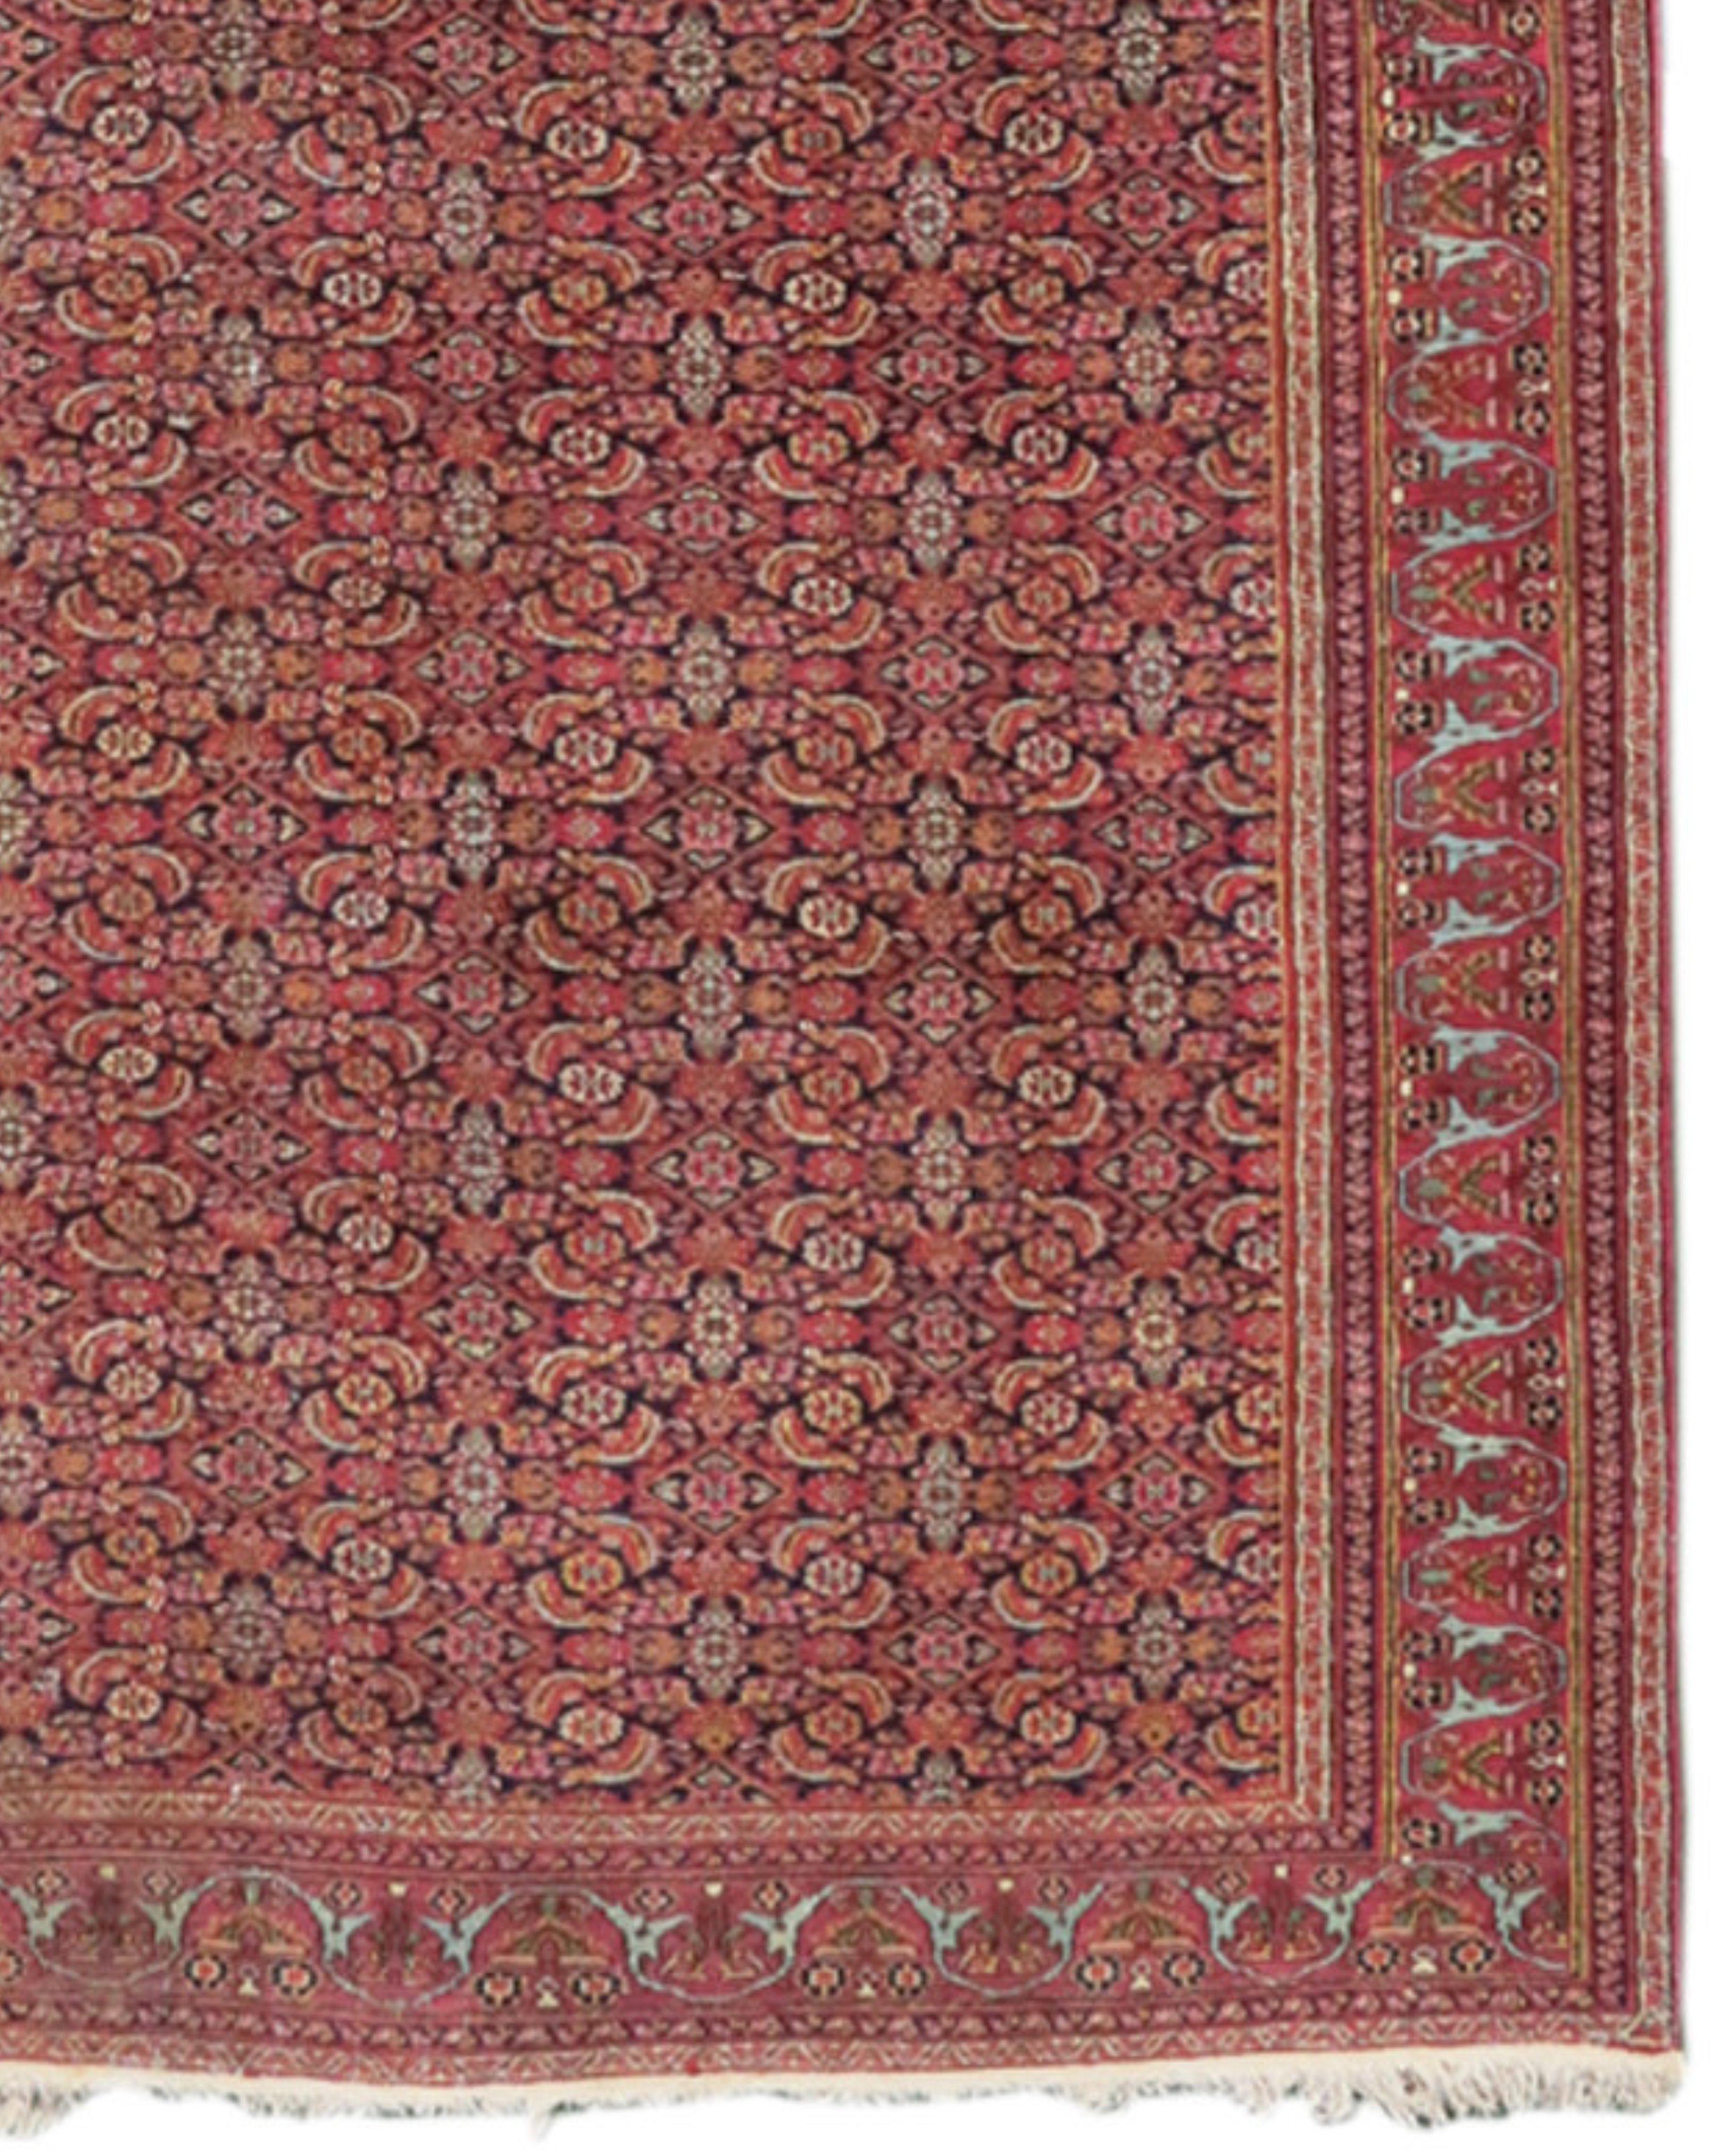 Khorassan Gallery Carpet, Late 19th century In Excellent Condition For Sale In San Francisco, CA